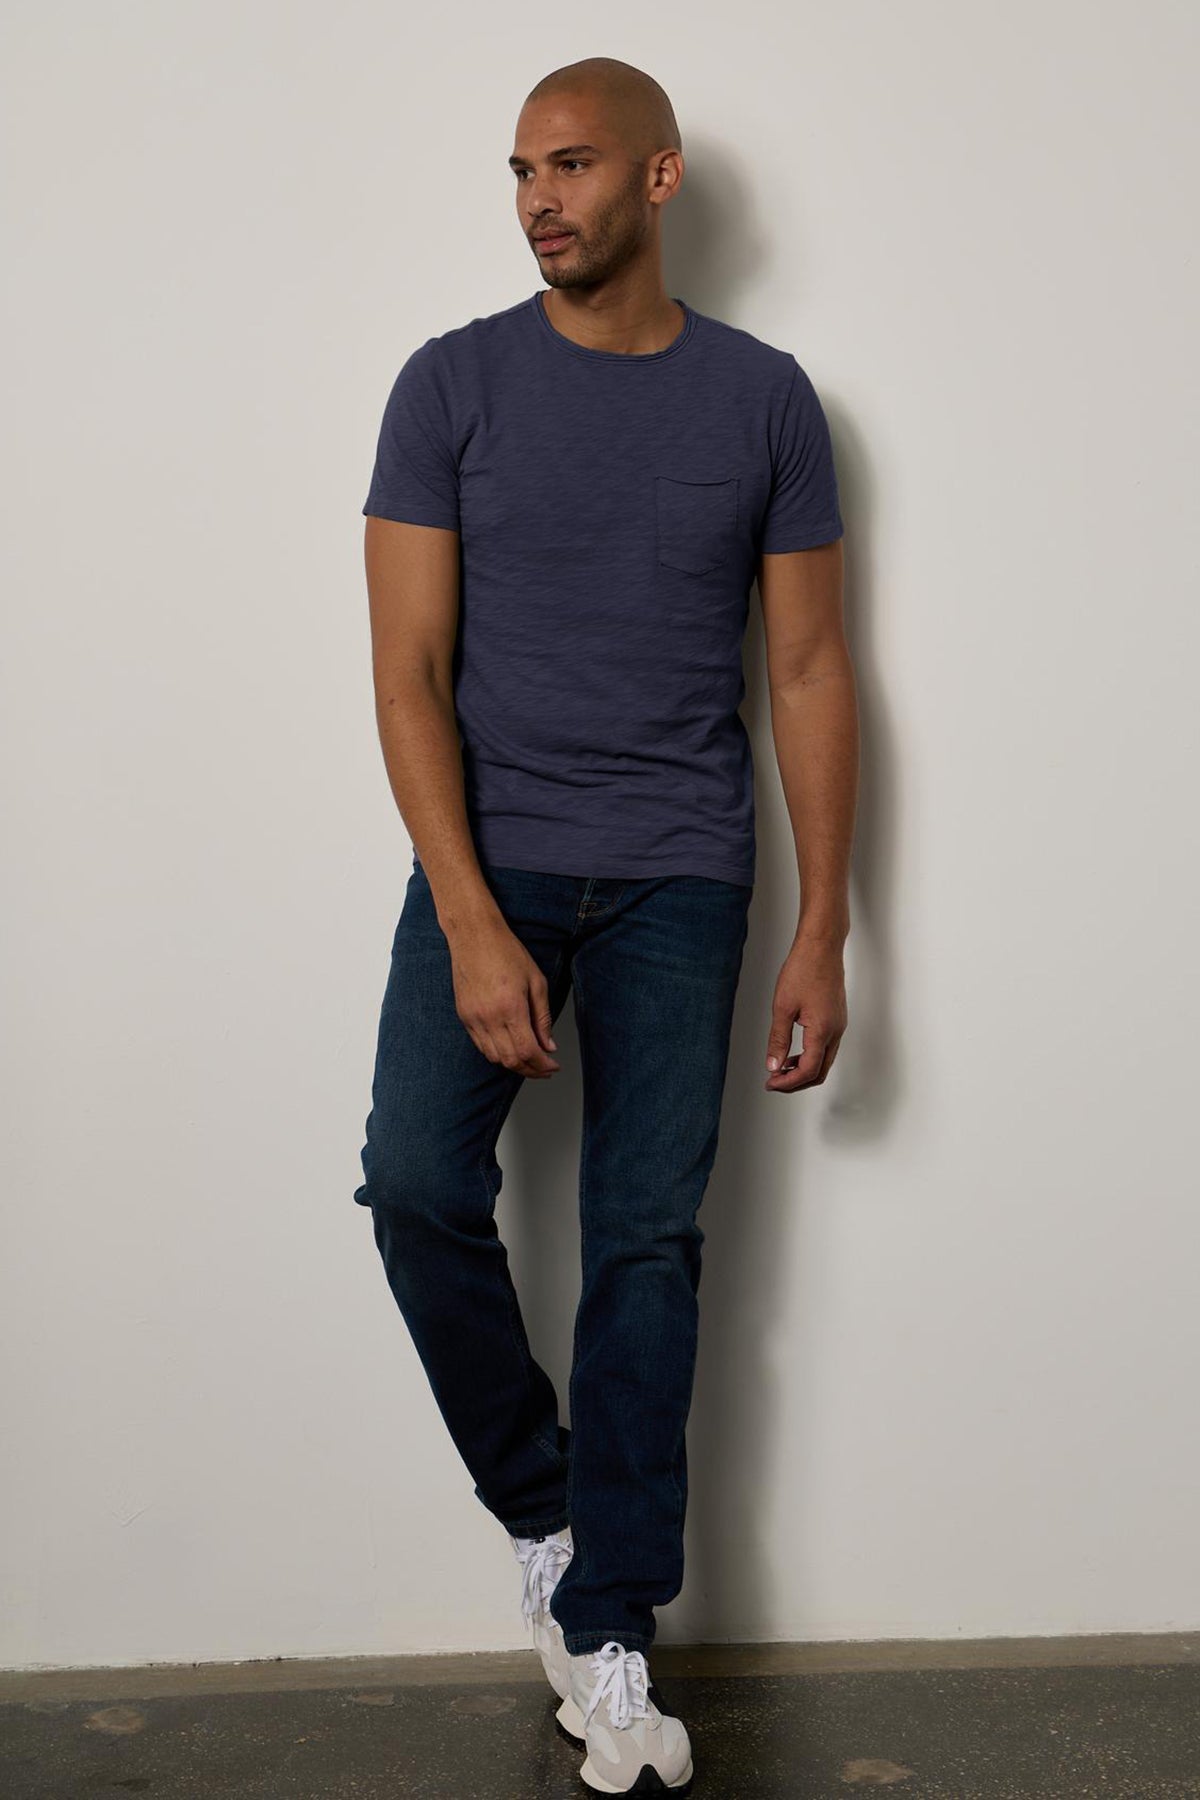 A man stands leaning against a wall, wearing a dark blue textured cotton slub CHAD TEE by Velvet by Graham & Spencer, jeans, and white sneakers. He is bald and gazing to his left.-26146501230785